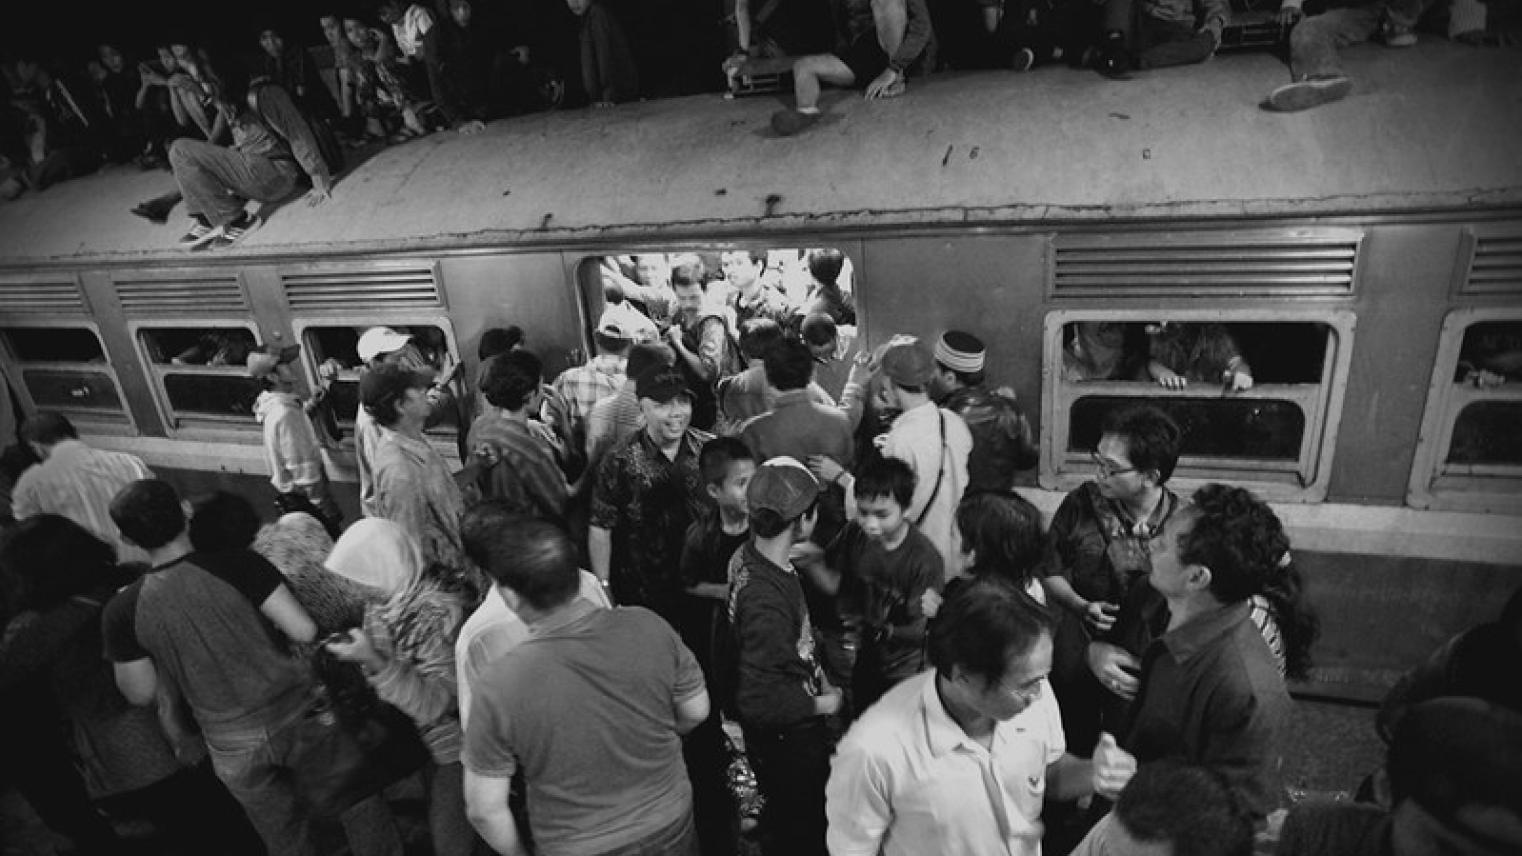 Image of economy class rail passengers, Jakarta, by Aan Kasman from https://flic.kr/p/92xxPB (https://creativecommons.org/licenses/by/2.0/)